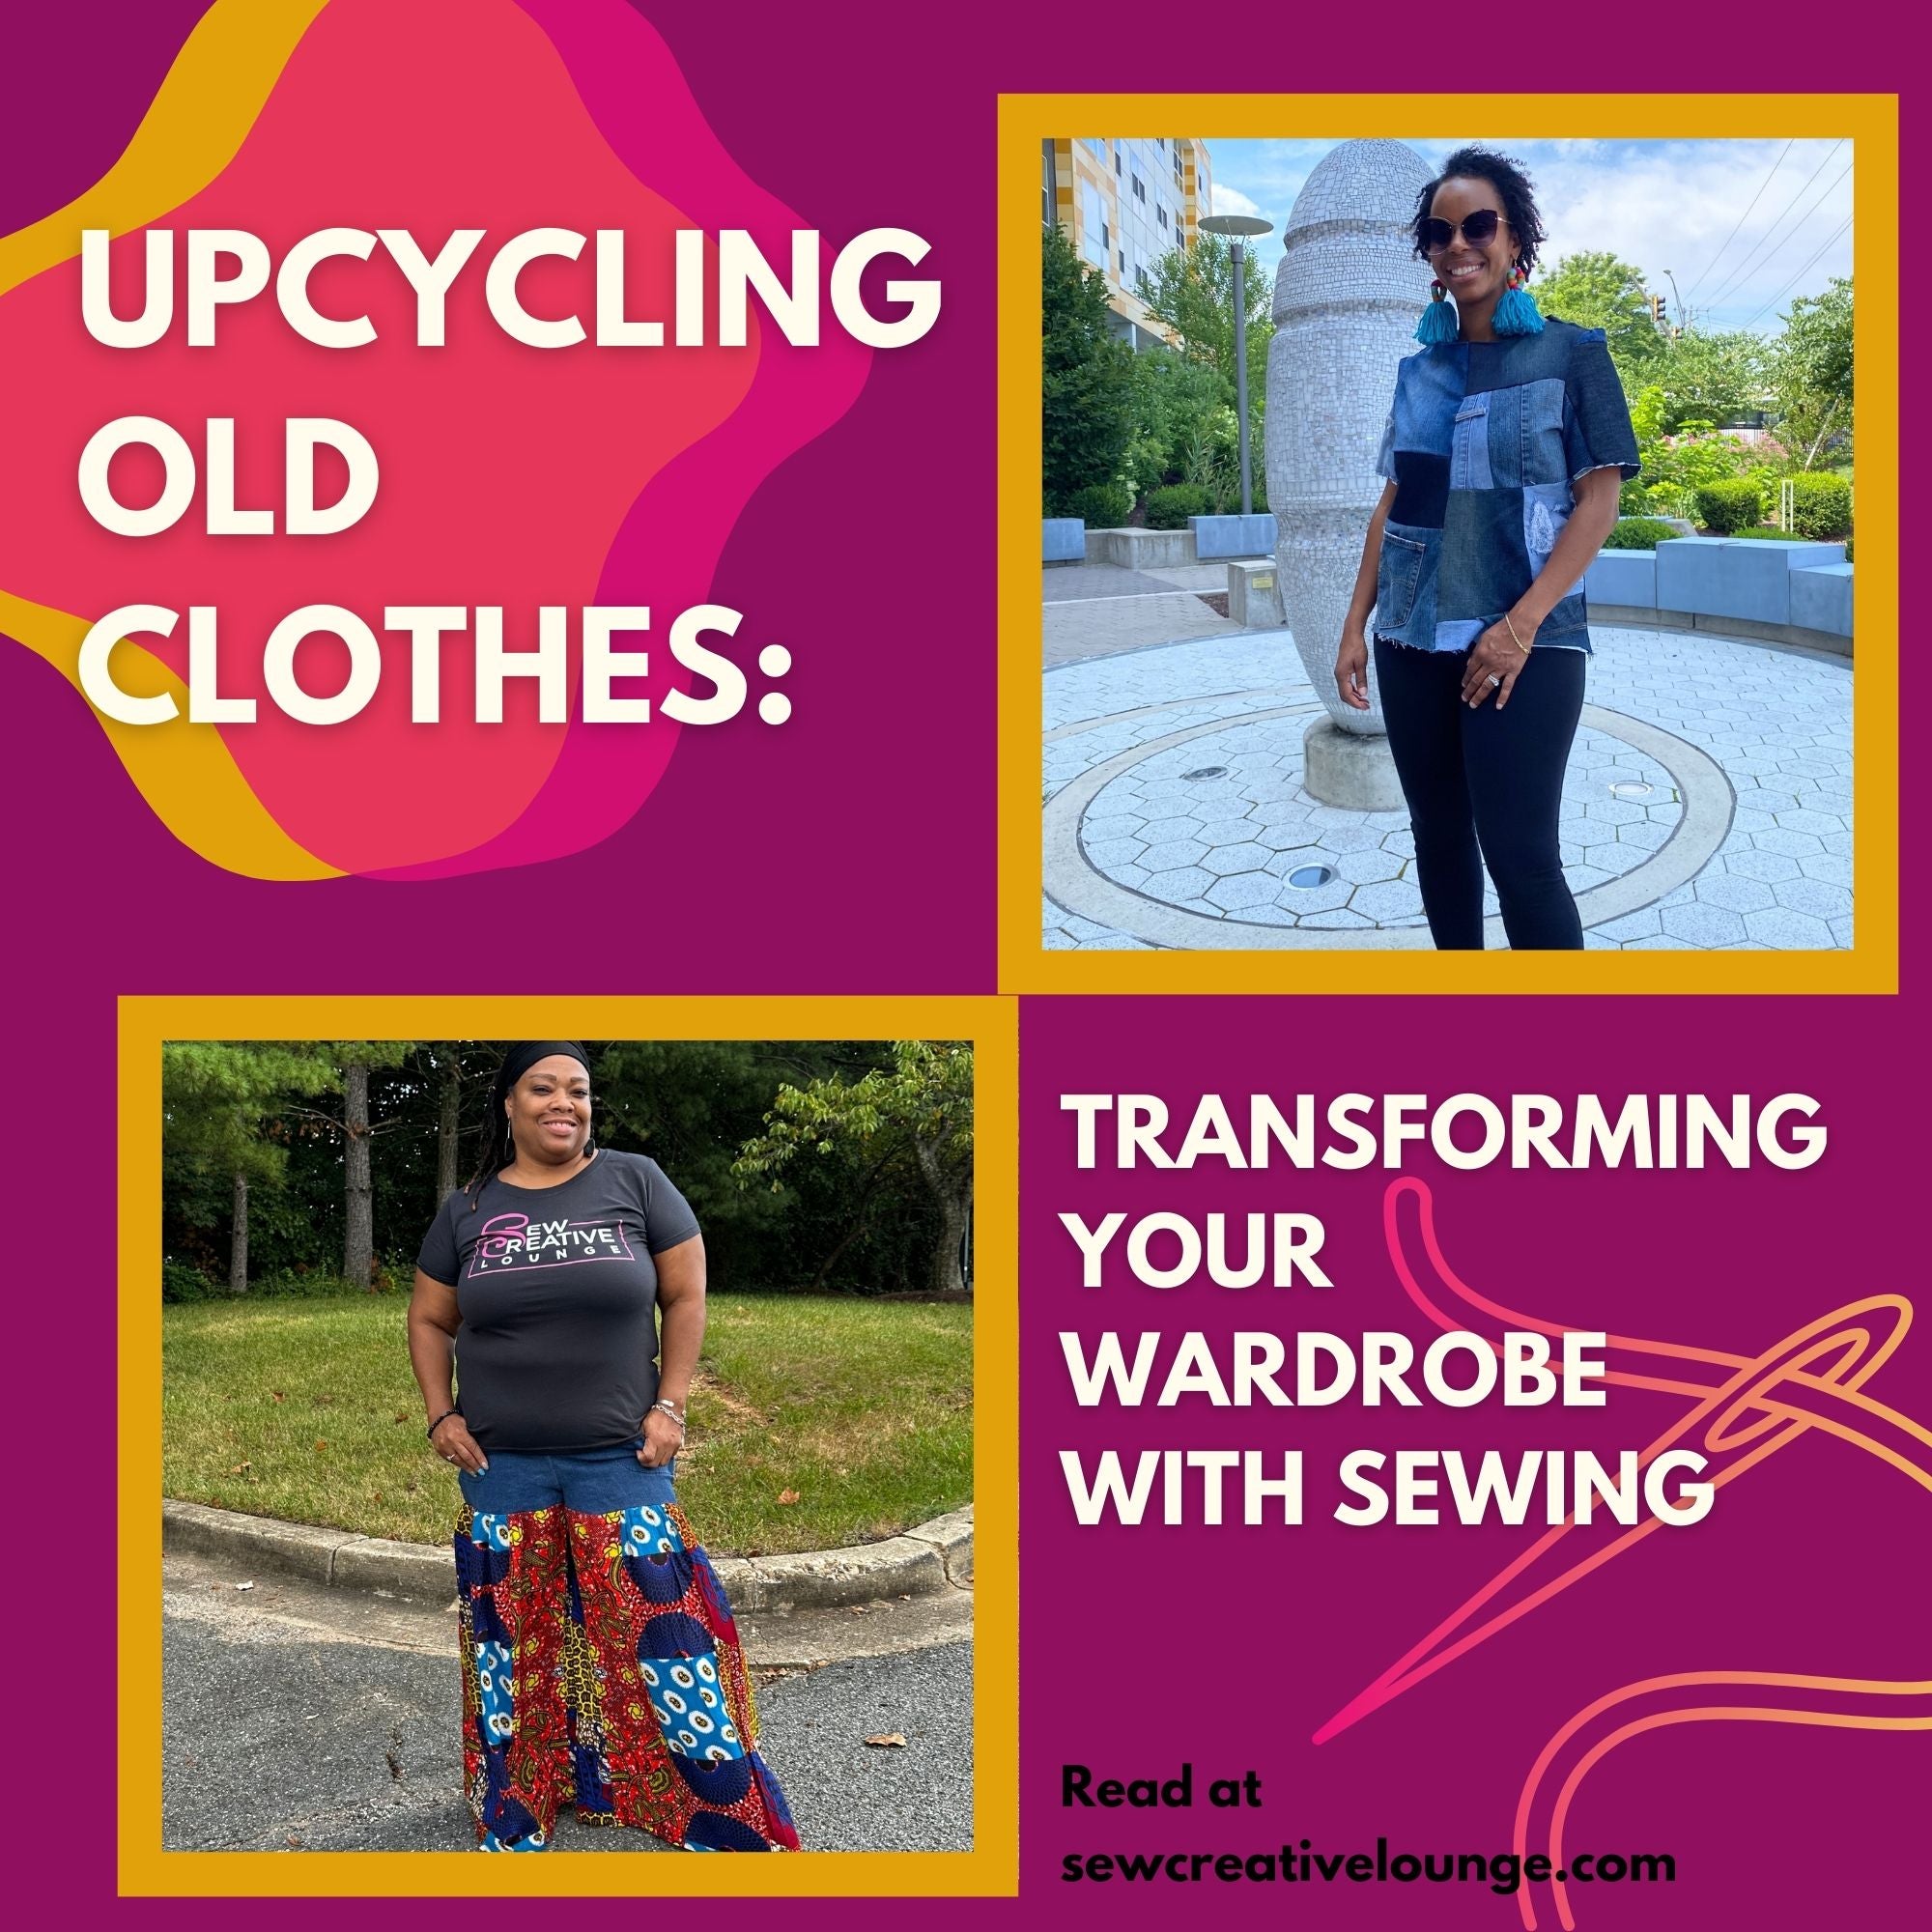 Upcycling Old Clothes: Transforming Your Wardrobe with Sewing